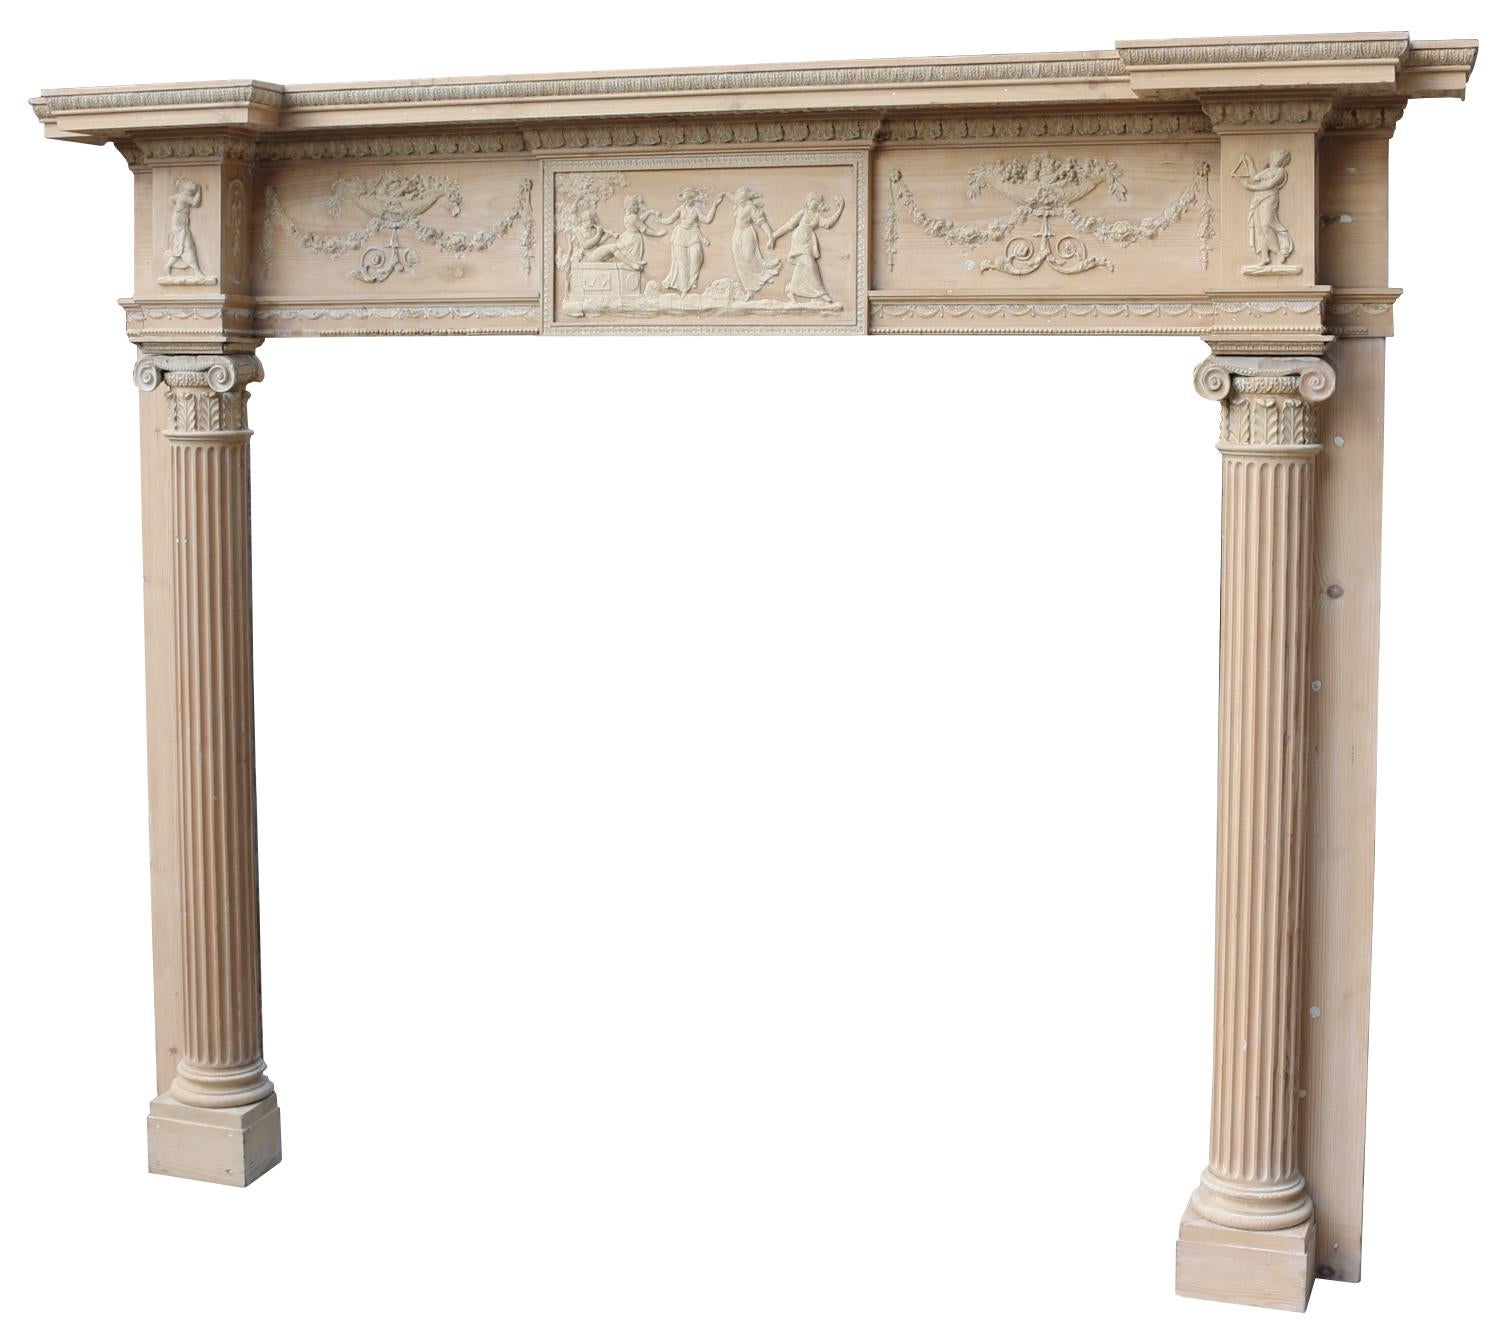 An English, late George III fire surround with breakfront mantle, and applied composition (gesso) decoration.

Additional Dimensions

(For scale purposes Boris (in the photograph) is 6”4’)

Opening Height 153 cm

Opening Width 172